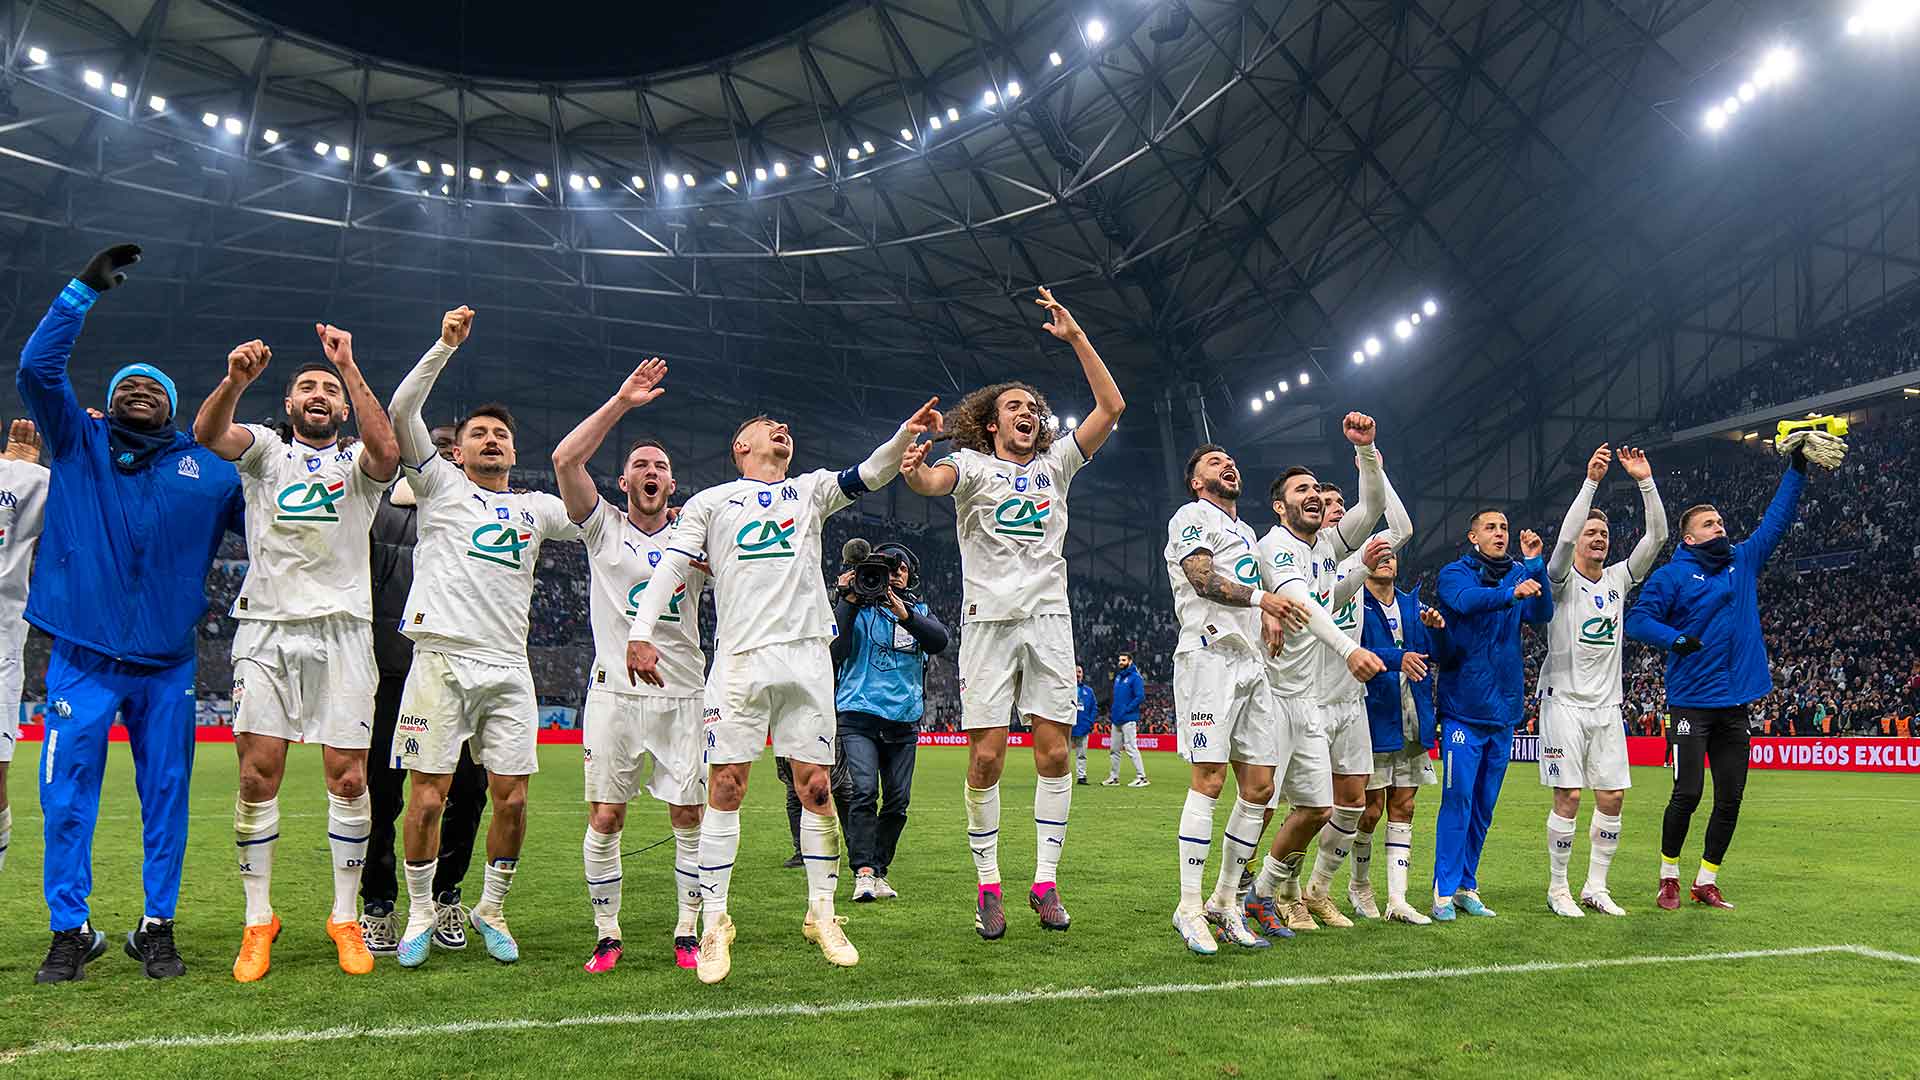 OM players and staff celebrating after a win at the Orange Vélodrome